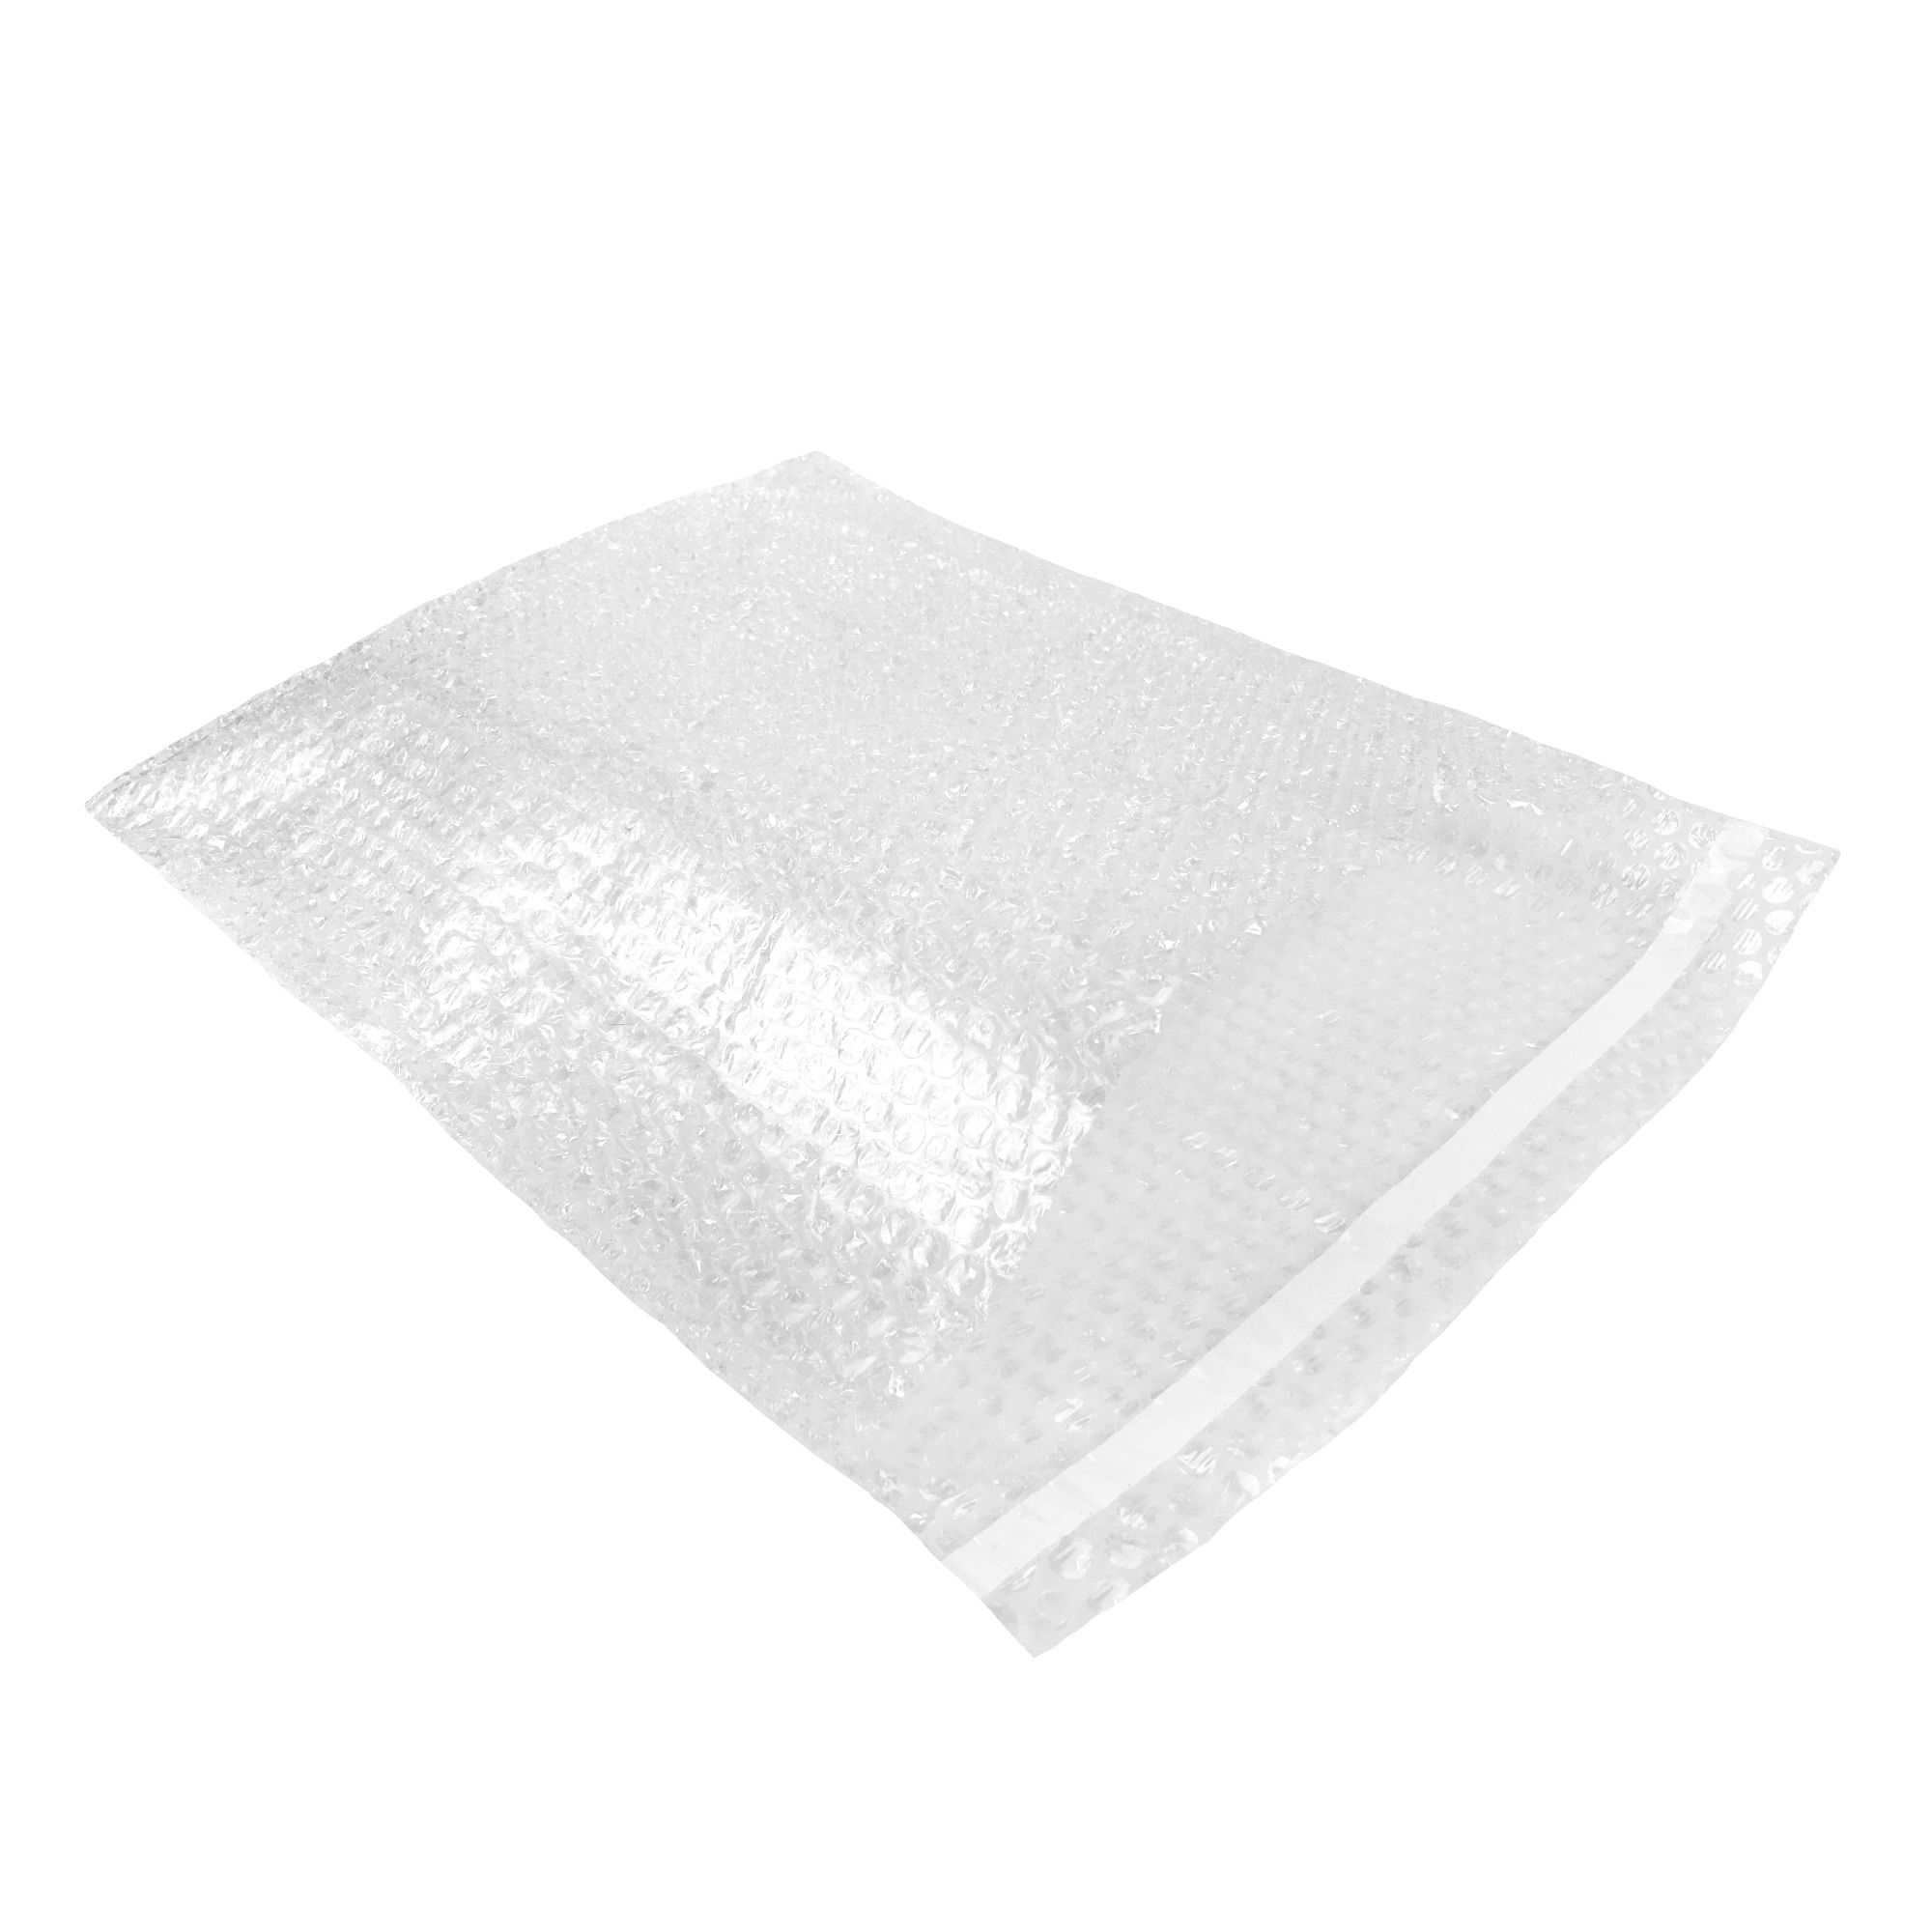 Large Bubble Bags 8 x 11.5 #5 - Pack of 150